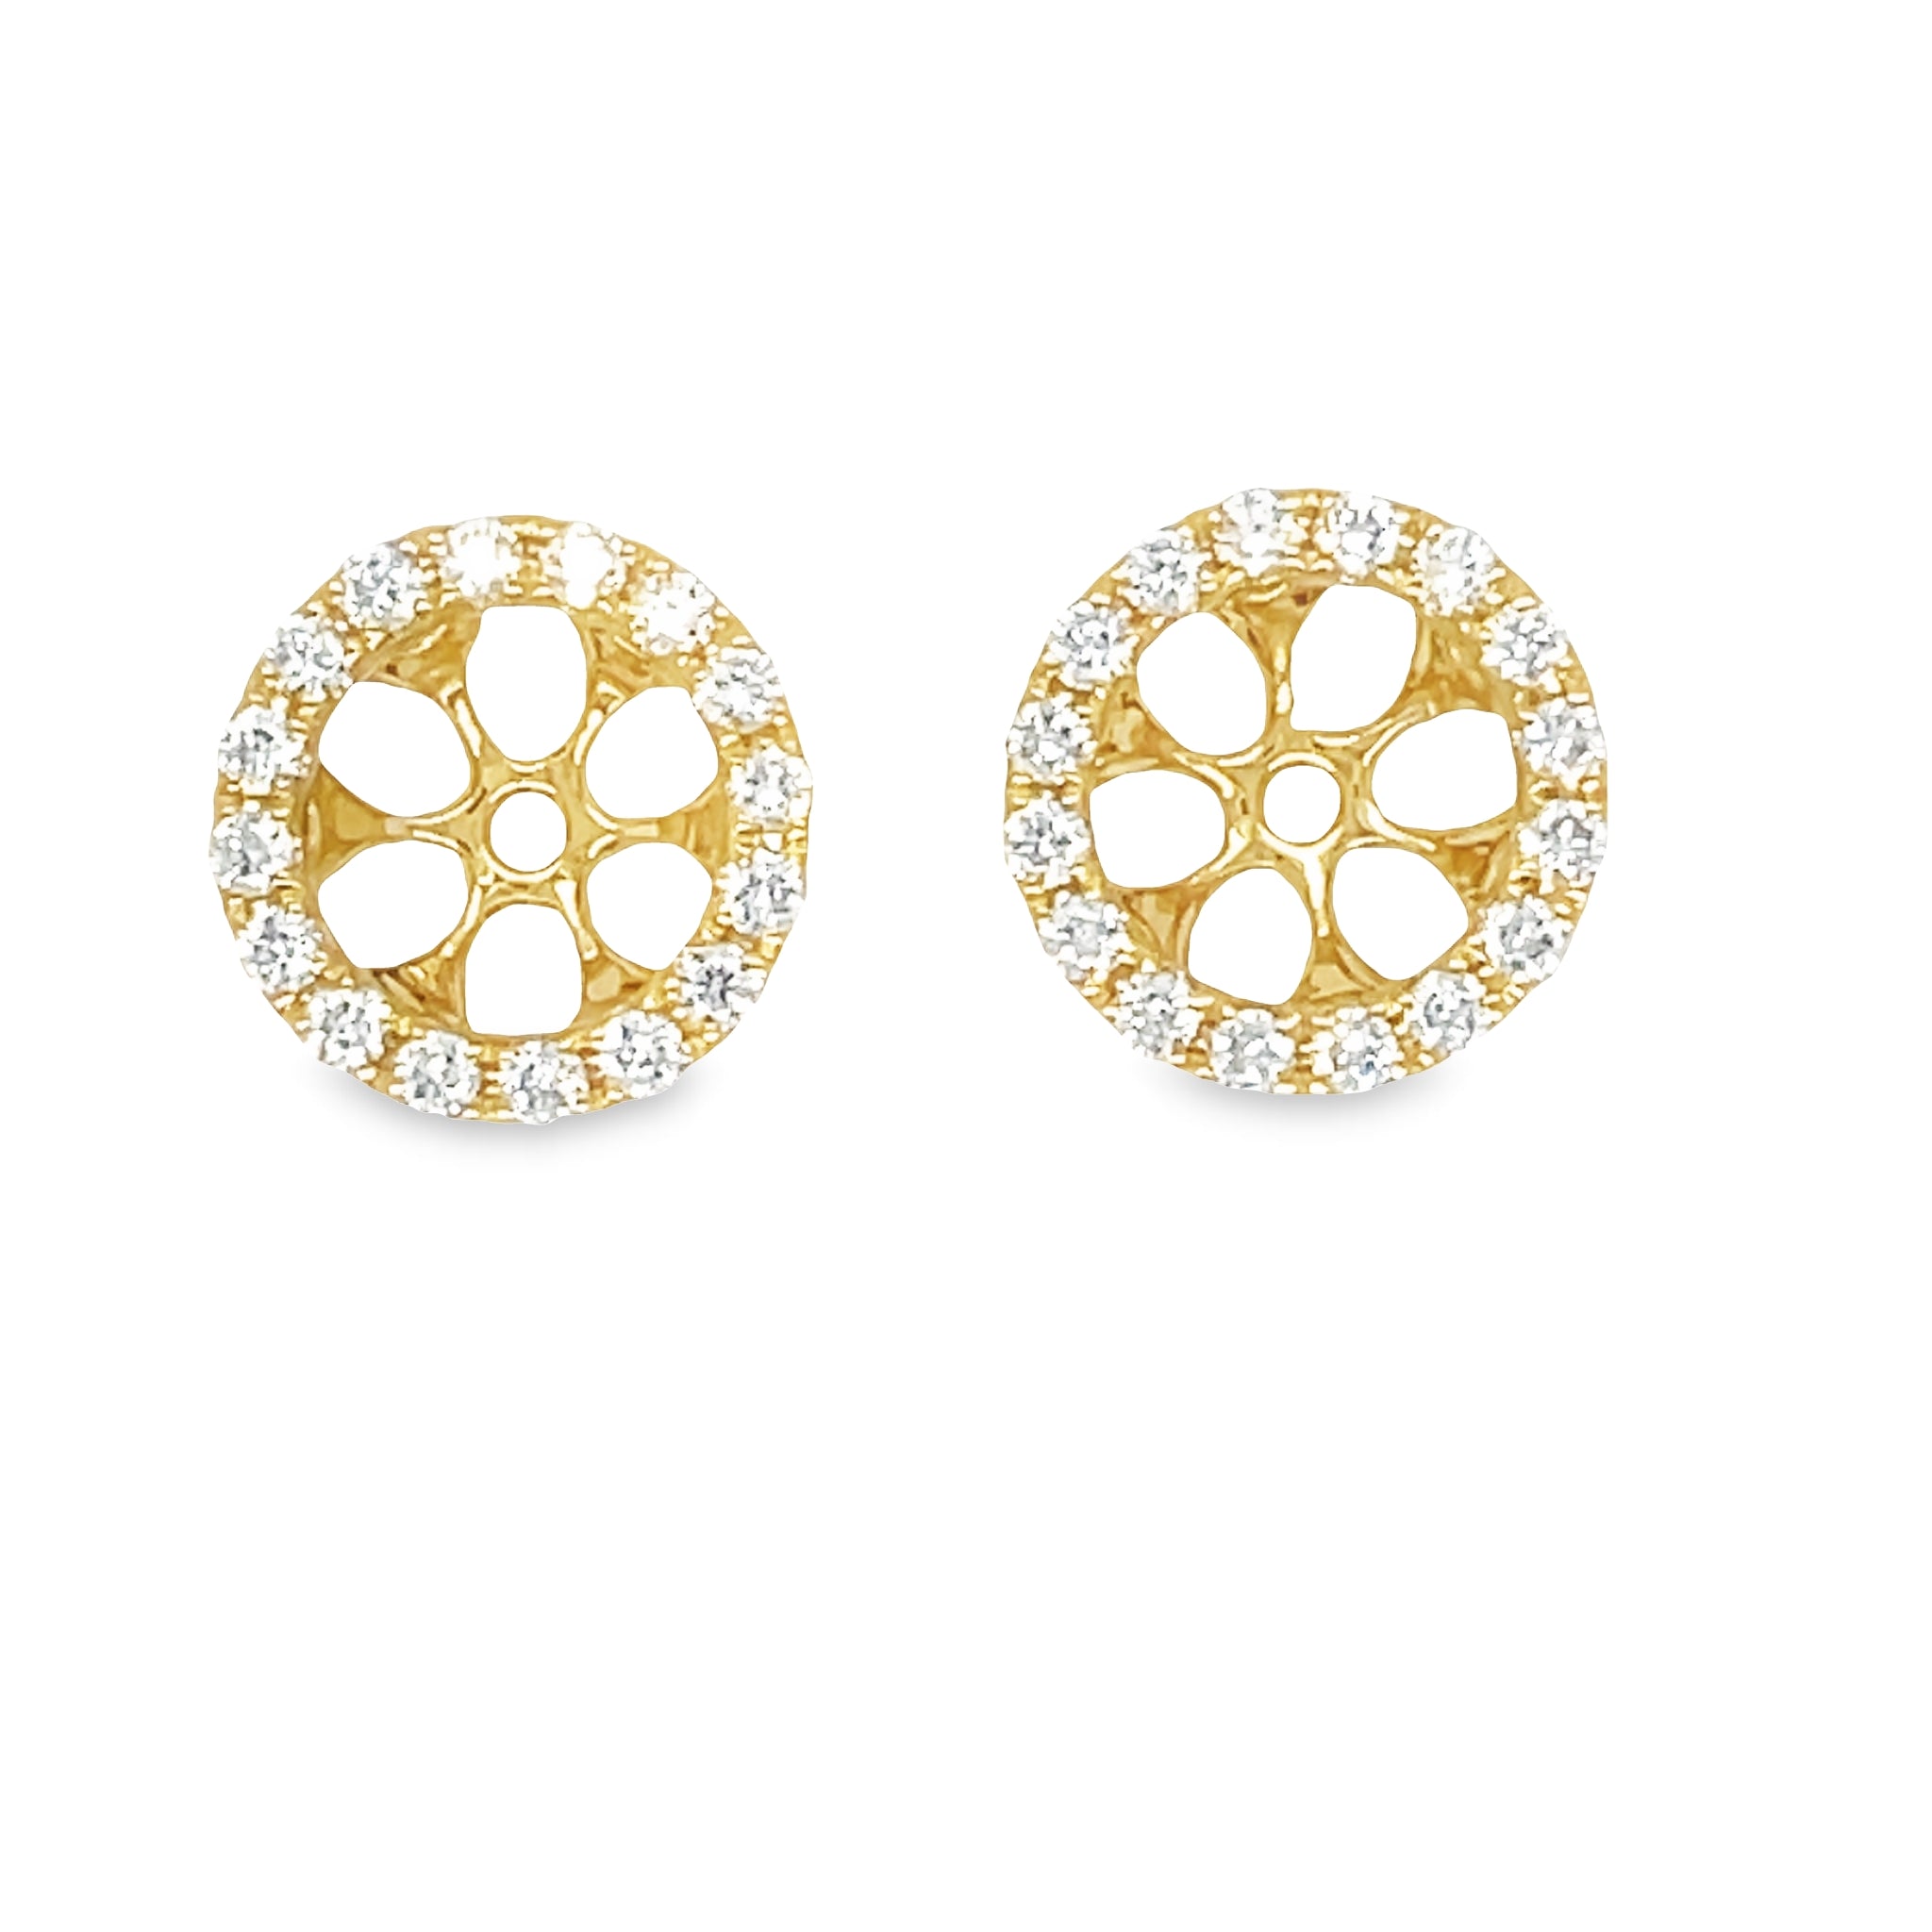 Let your sparkle shine with these stunning Small Removable Round Diamond Jacket Earrings! Crafted of 18k yellow gold, these earrings feature round diamonds 0.34 cts that will have you dazzling. Show off the ultimate in classic beauty and elegance!  Diamond studs not included 